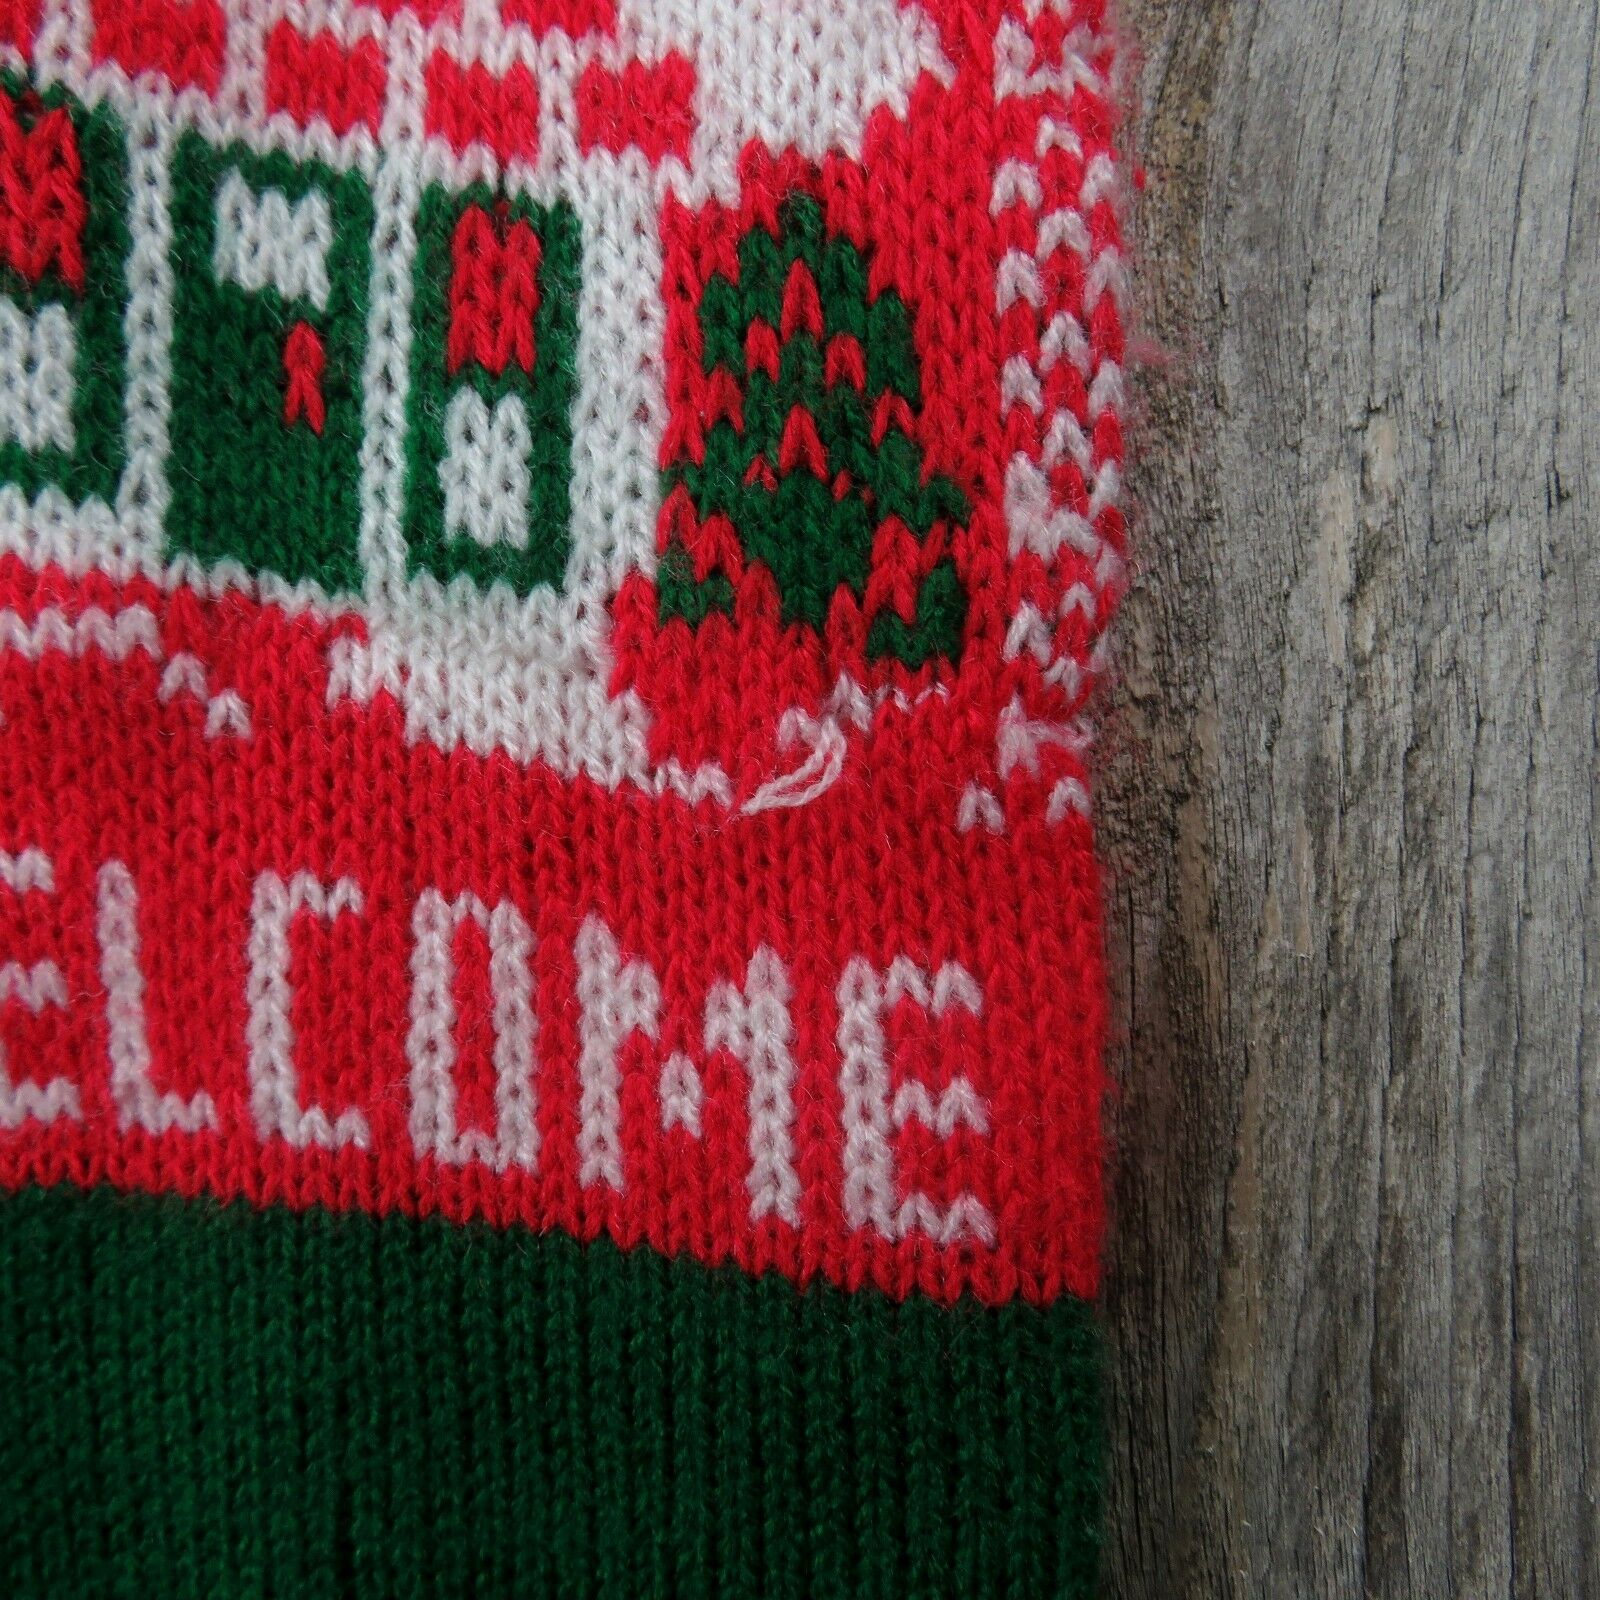 Vintage New House Stocking Knit Welcome Home Knitted Red Green 1980s - At Grandma's Table